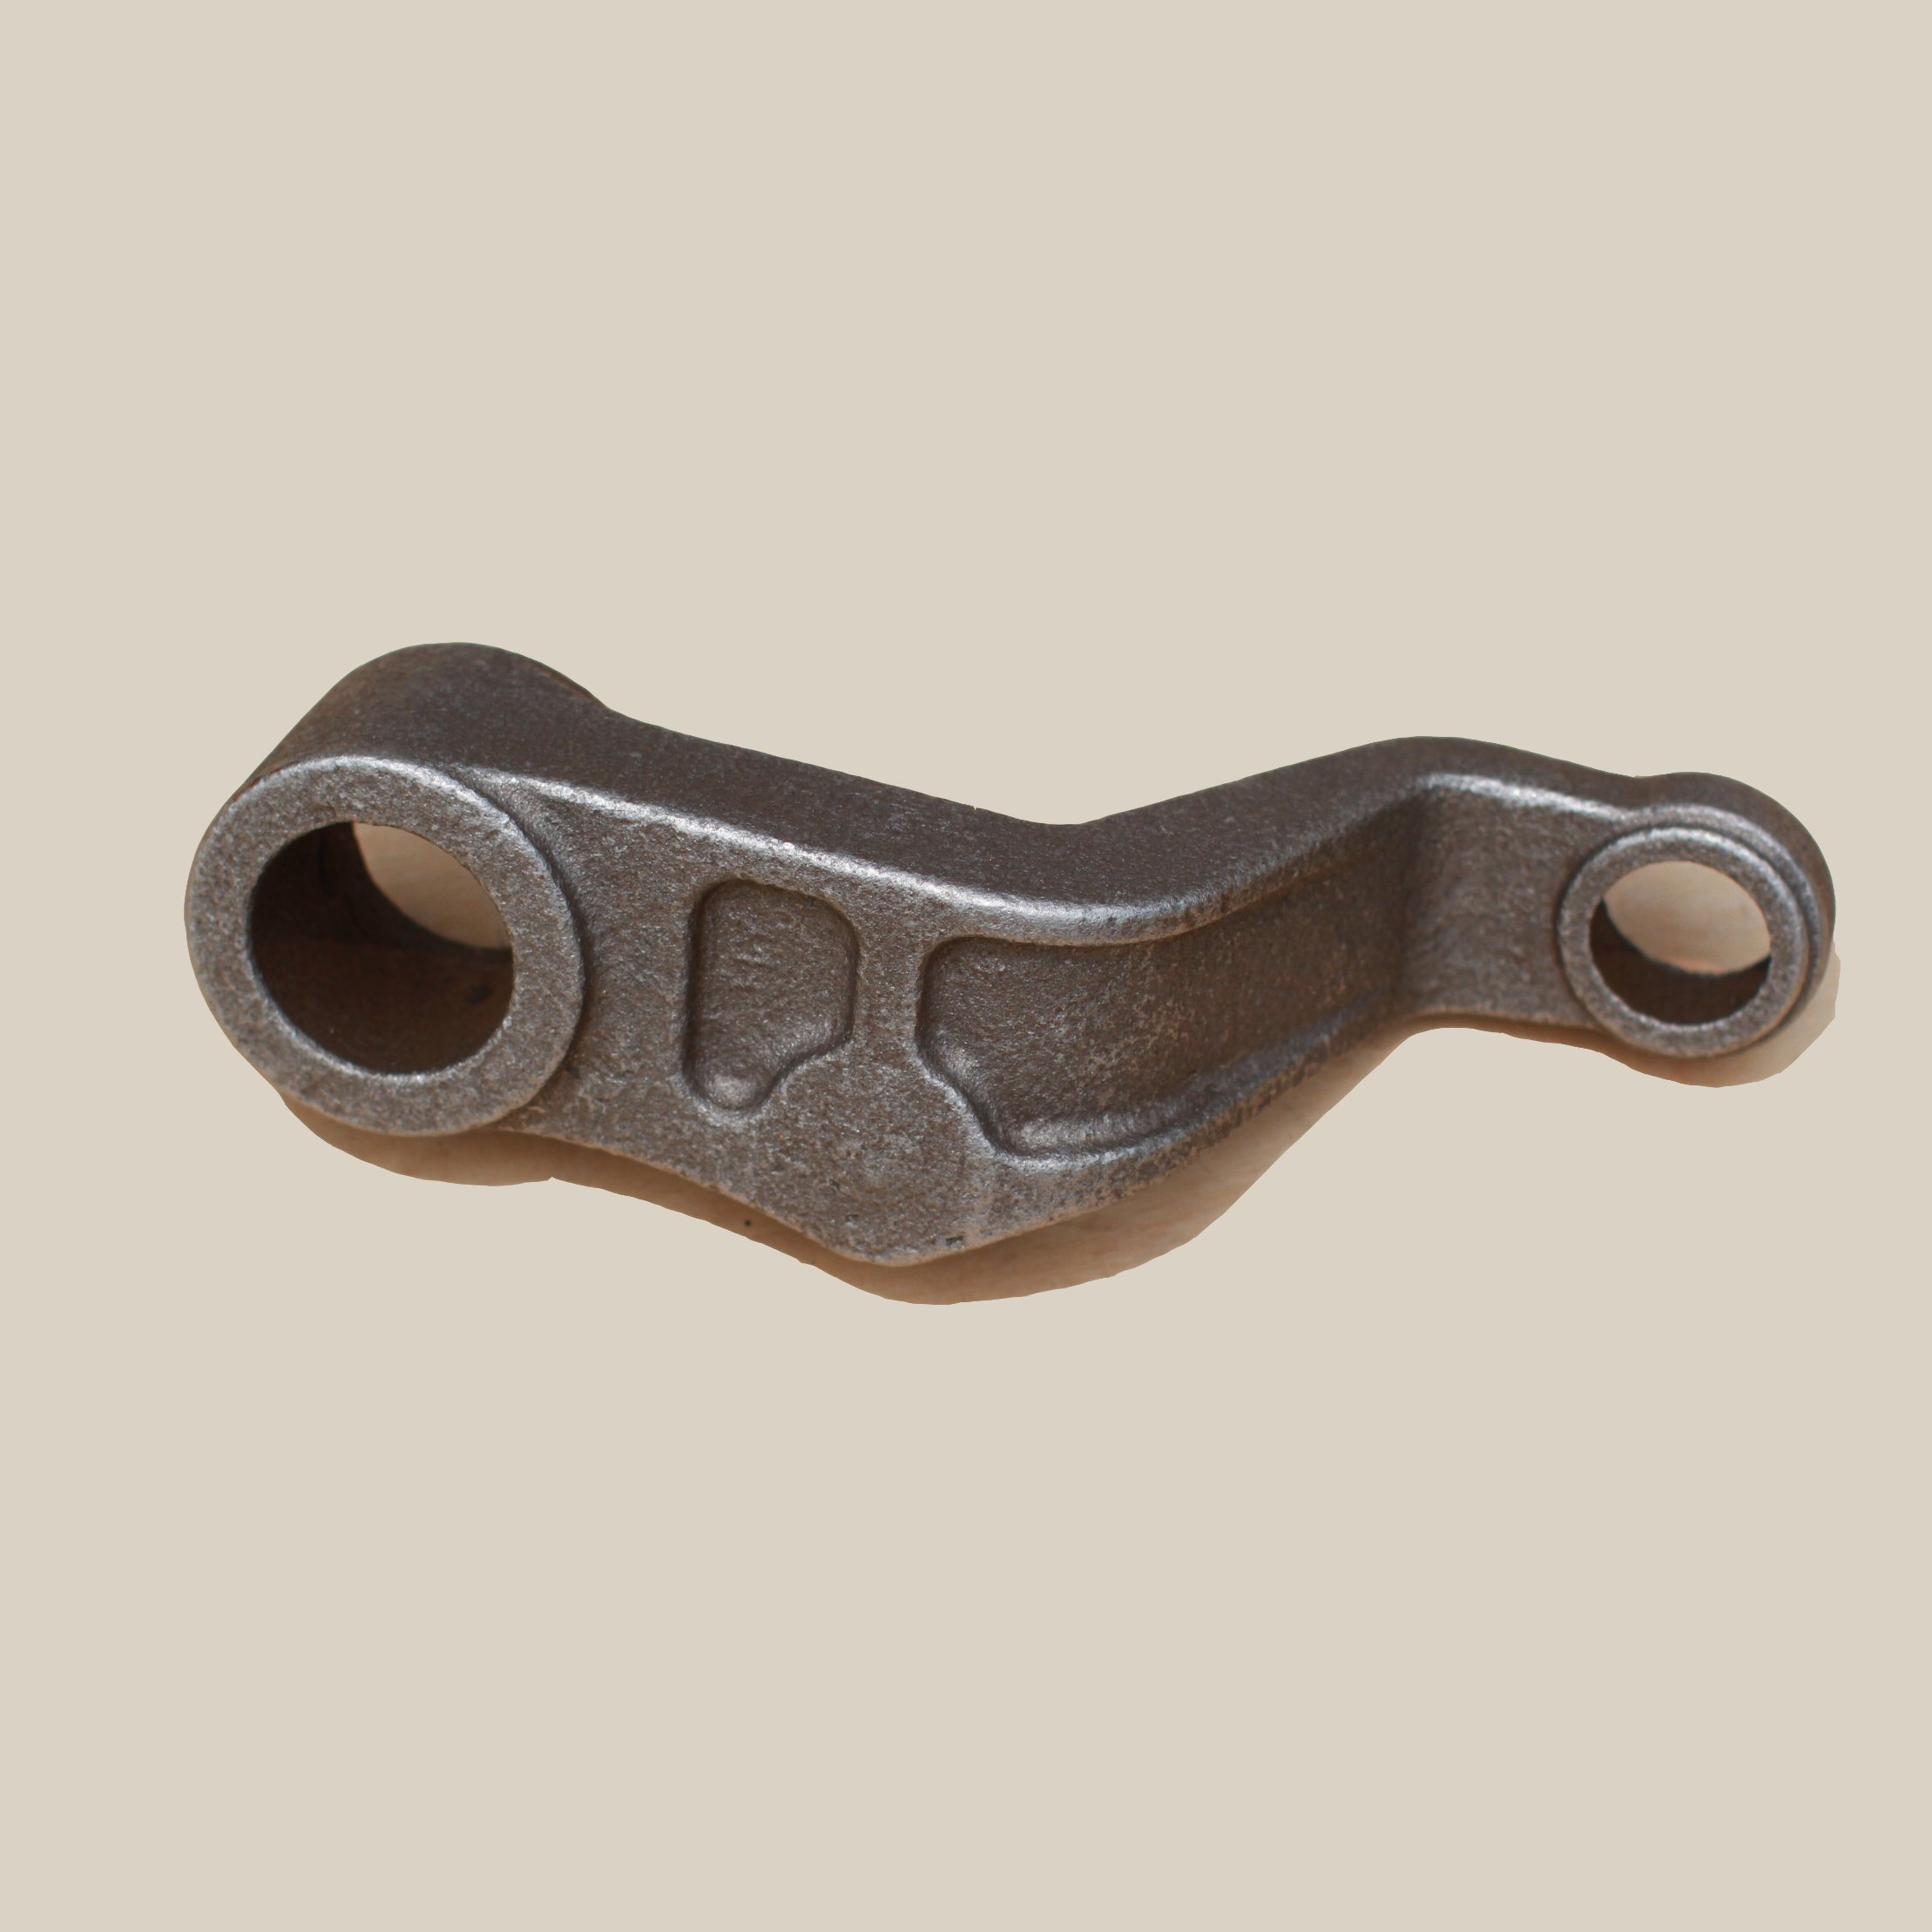 Alloy Steel Casting Parts Connection Arm for Building Accessories